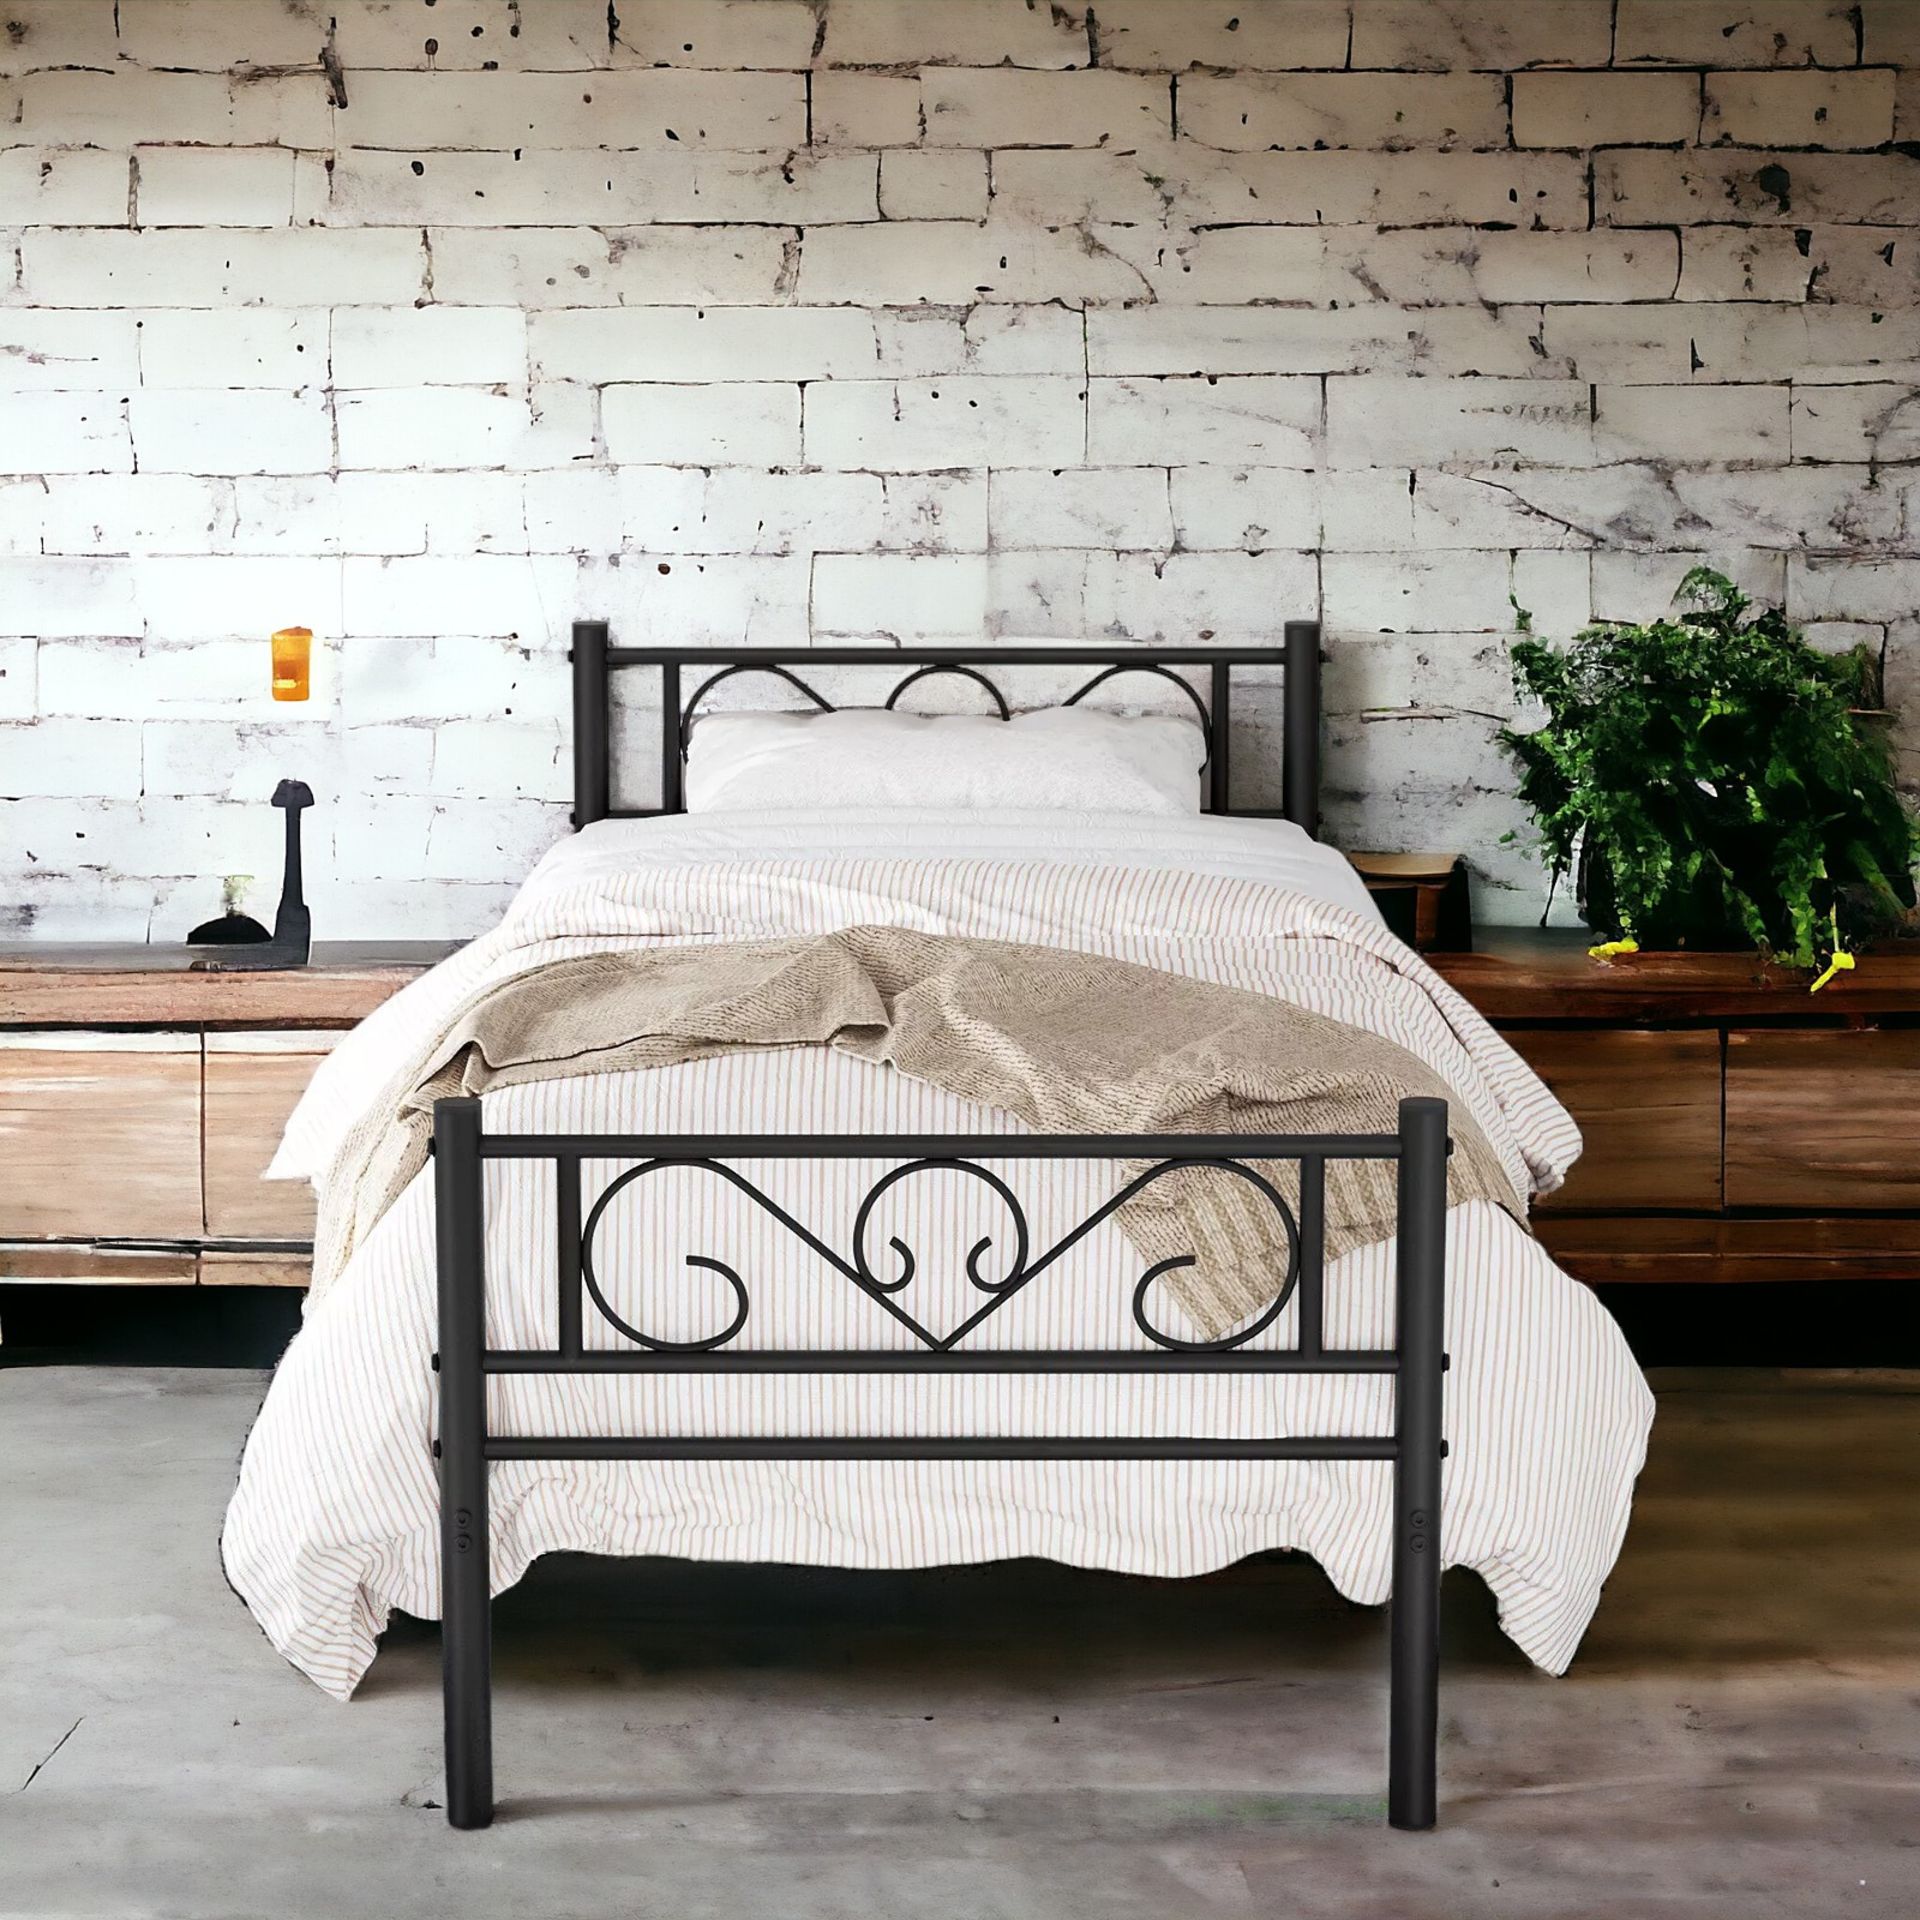 FREE DELIVERY - BRAND NEW SINGLE BED FRAME METAL BED FRAME, FITS 90 X 190 CM MATTRESS - Image 2 of 2